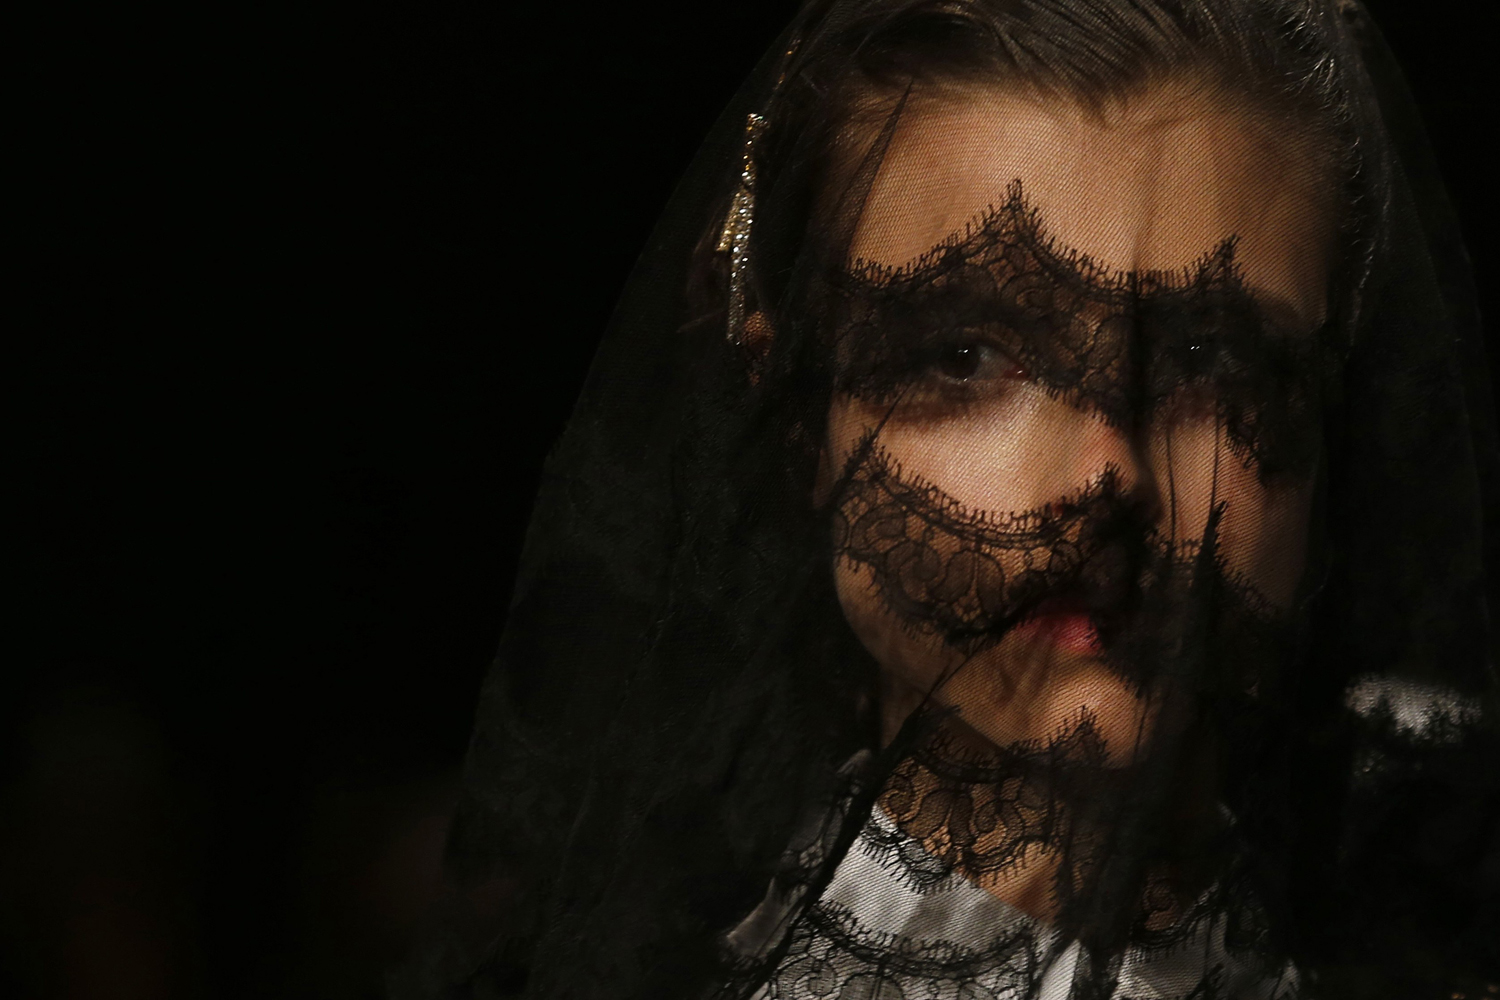 A model presents a creation from the Meadham Kirchhoff Autumn/Winter 2013 collection during London Fashion Week